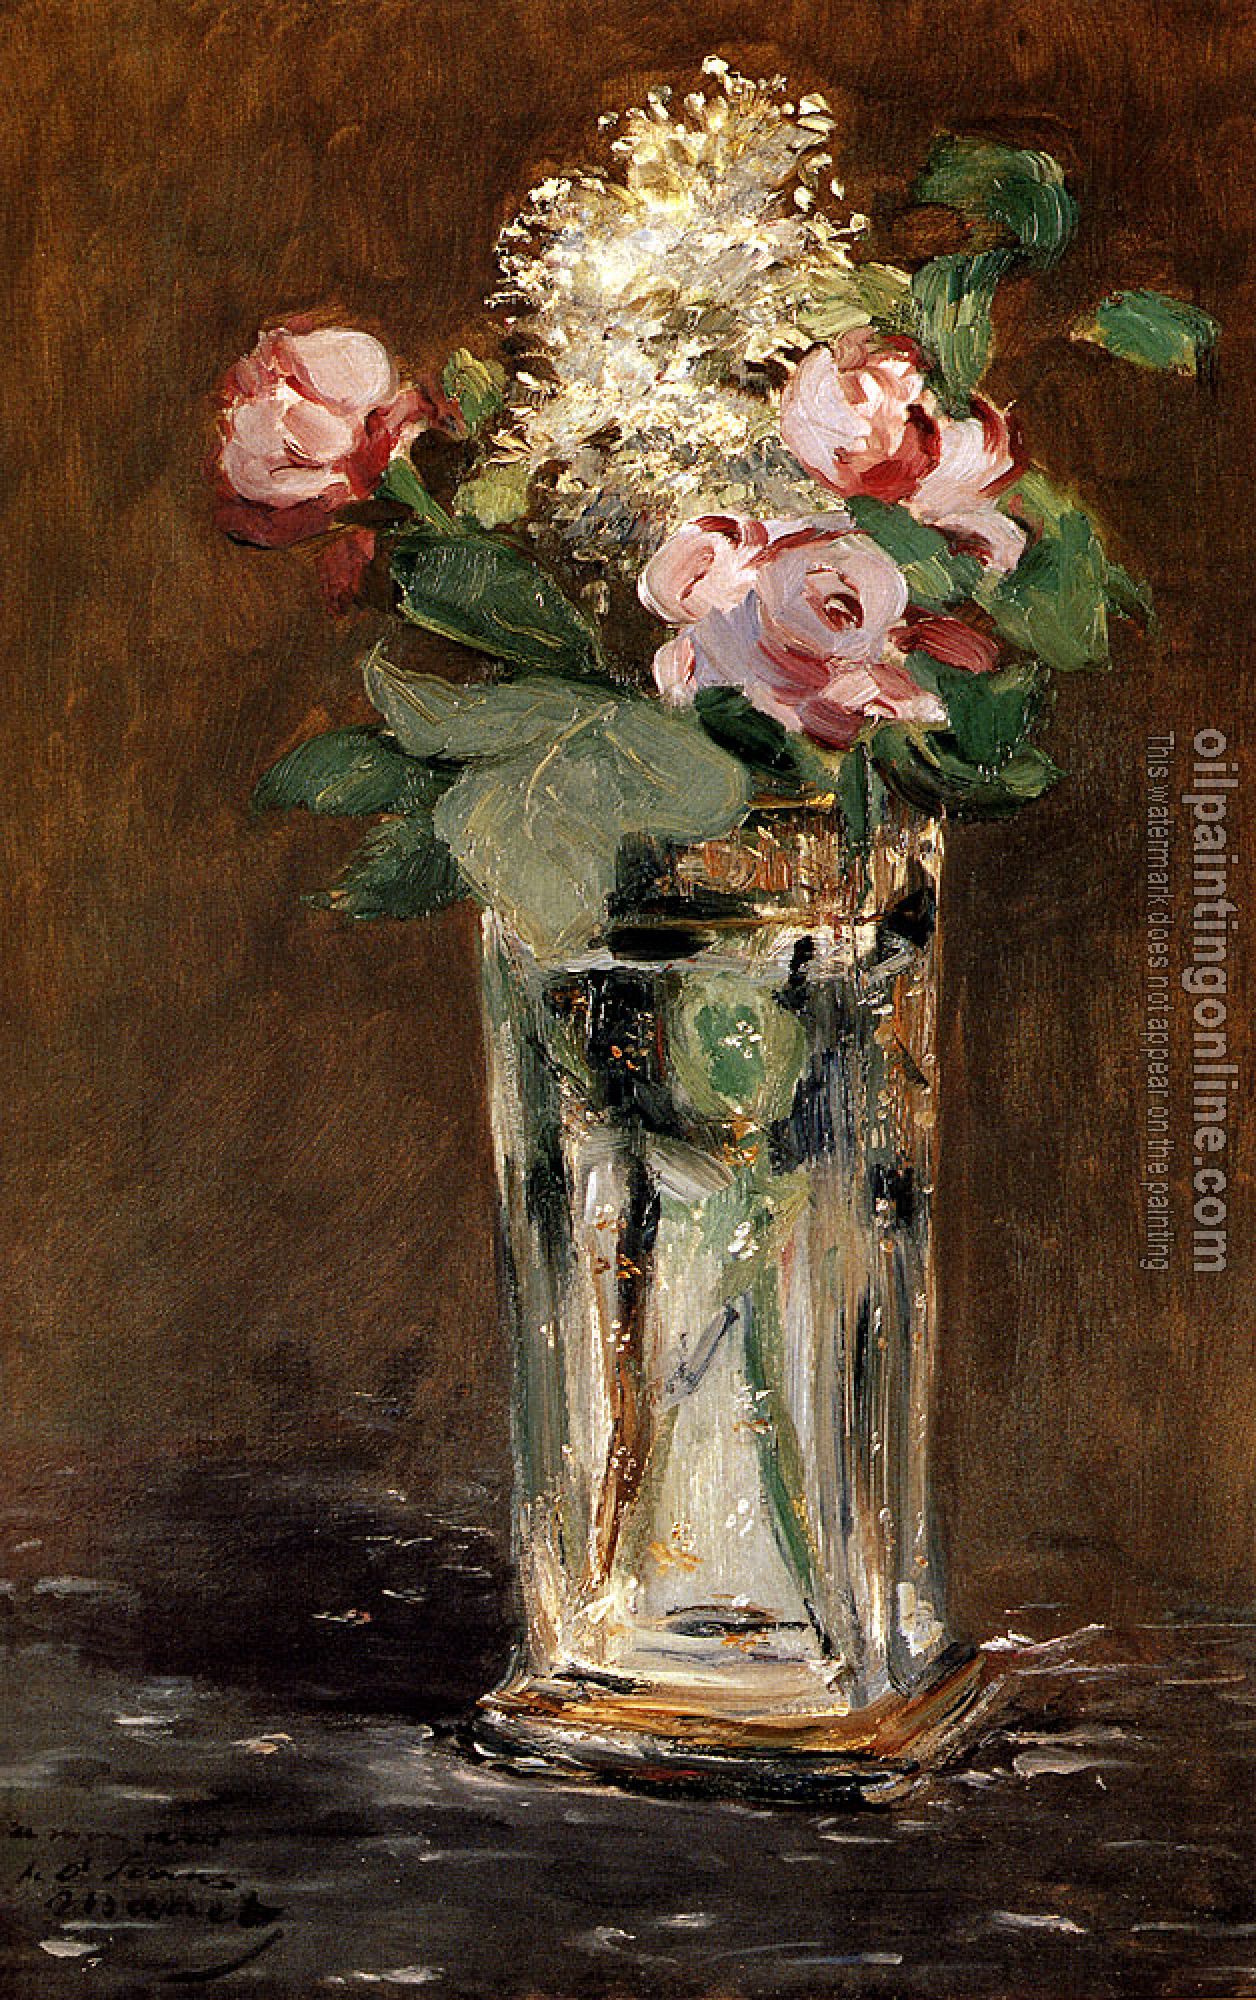 Manet, Edouard - Flowers In A Crystal Vase